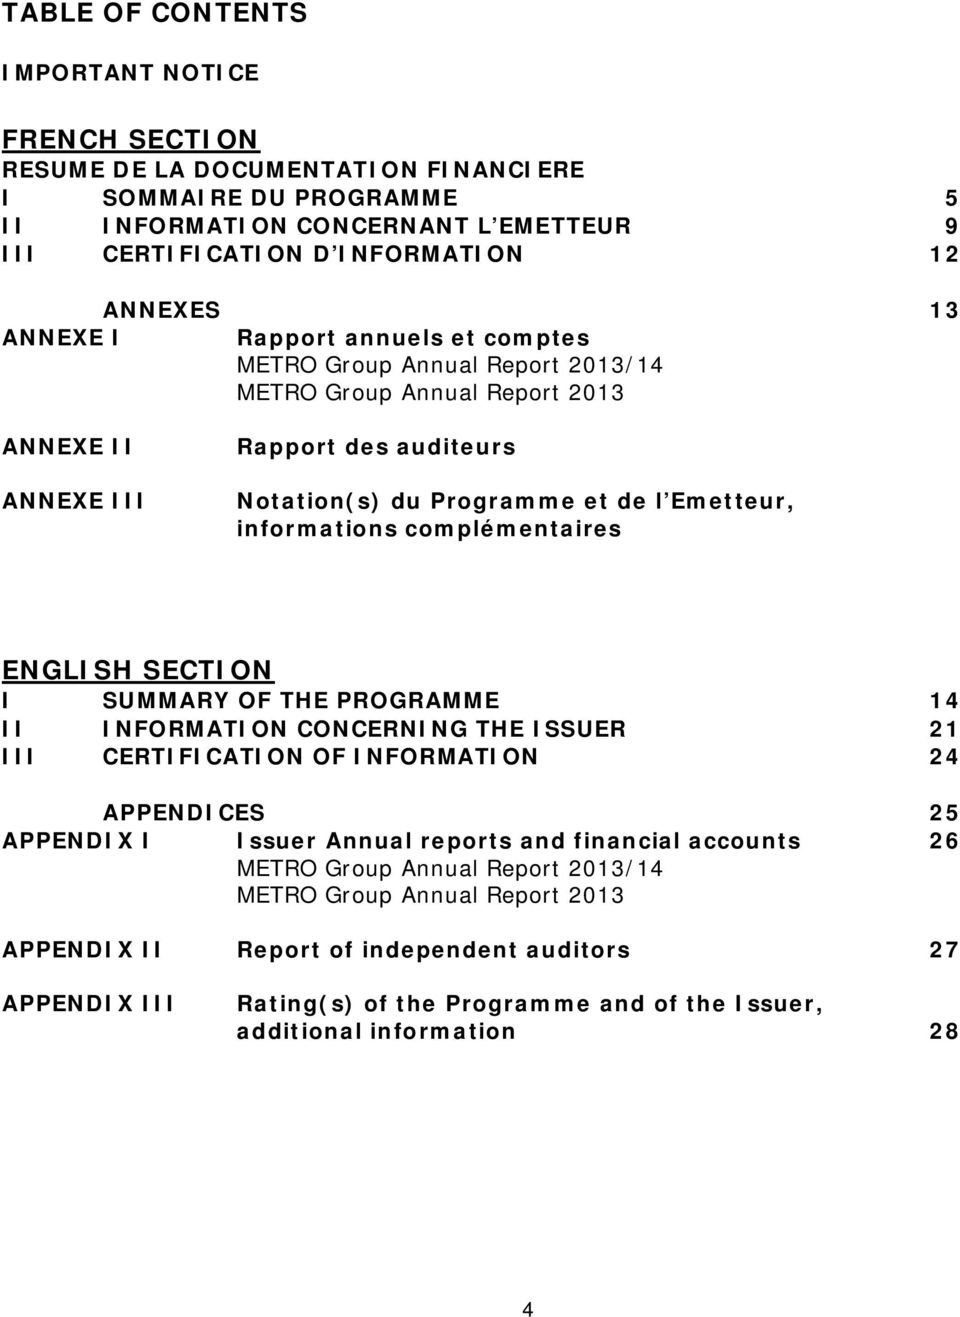 complémentaires ENGLISH SECTION I SUMMARY OF THE PROGRAMME 14 II INFORMATION CONCERNING THE ISSUER 21 III CERTIFICATION OF INFORMATION 24 APPENDICES 25 APPENDIX I Issuer Annual reports and financial